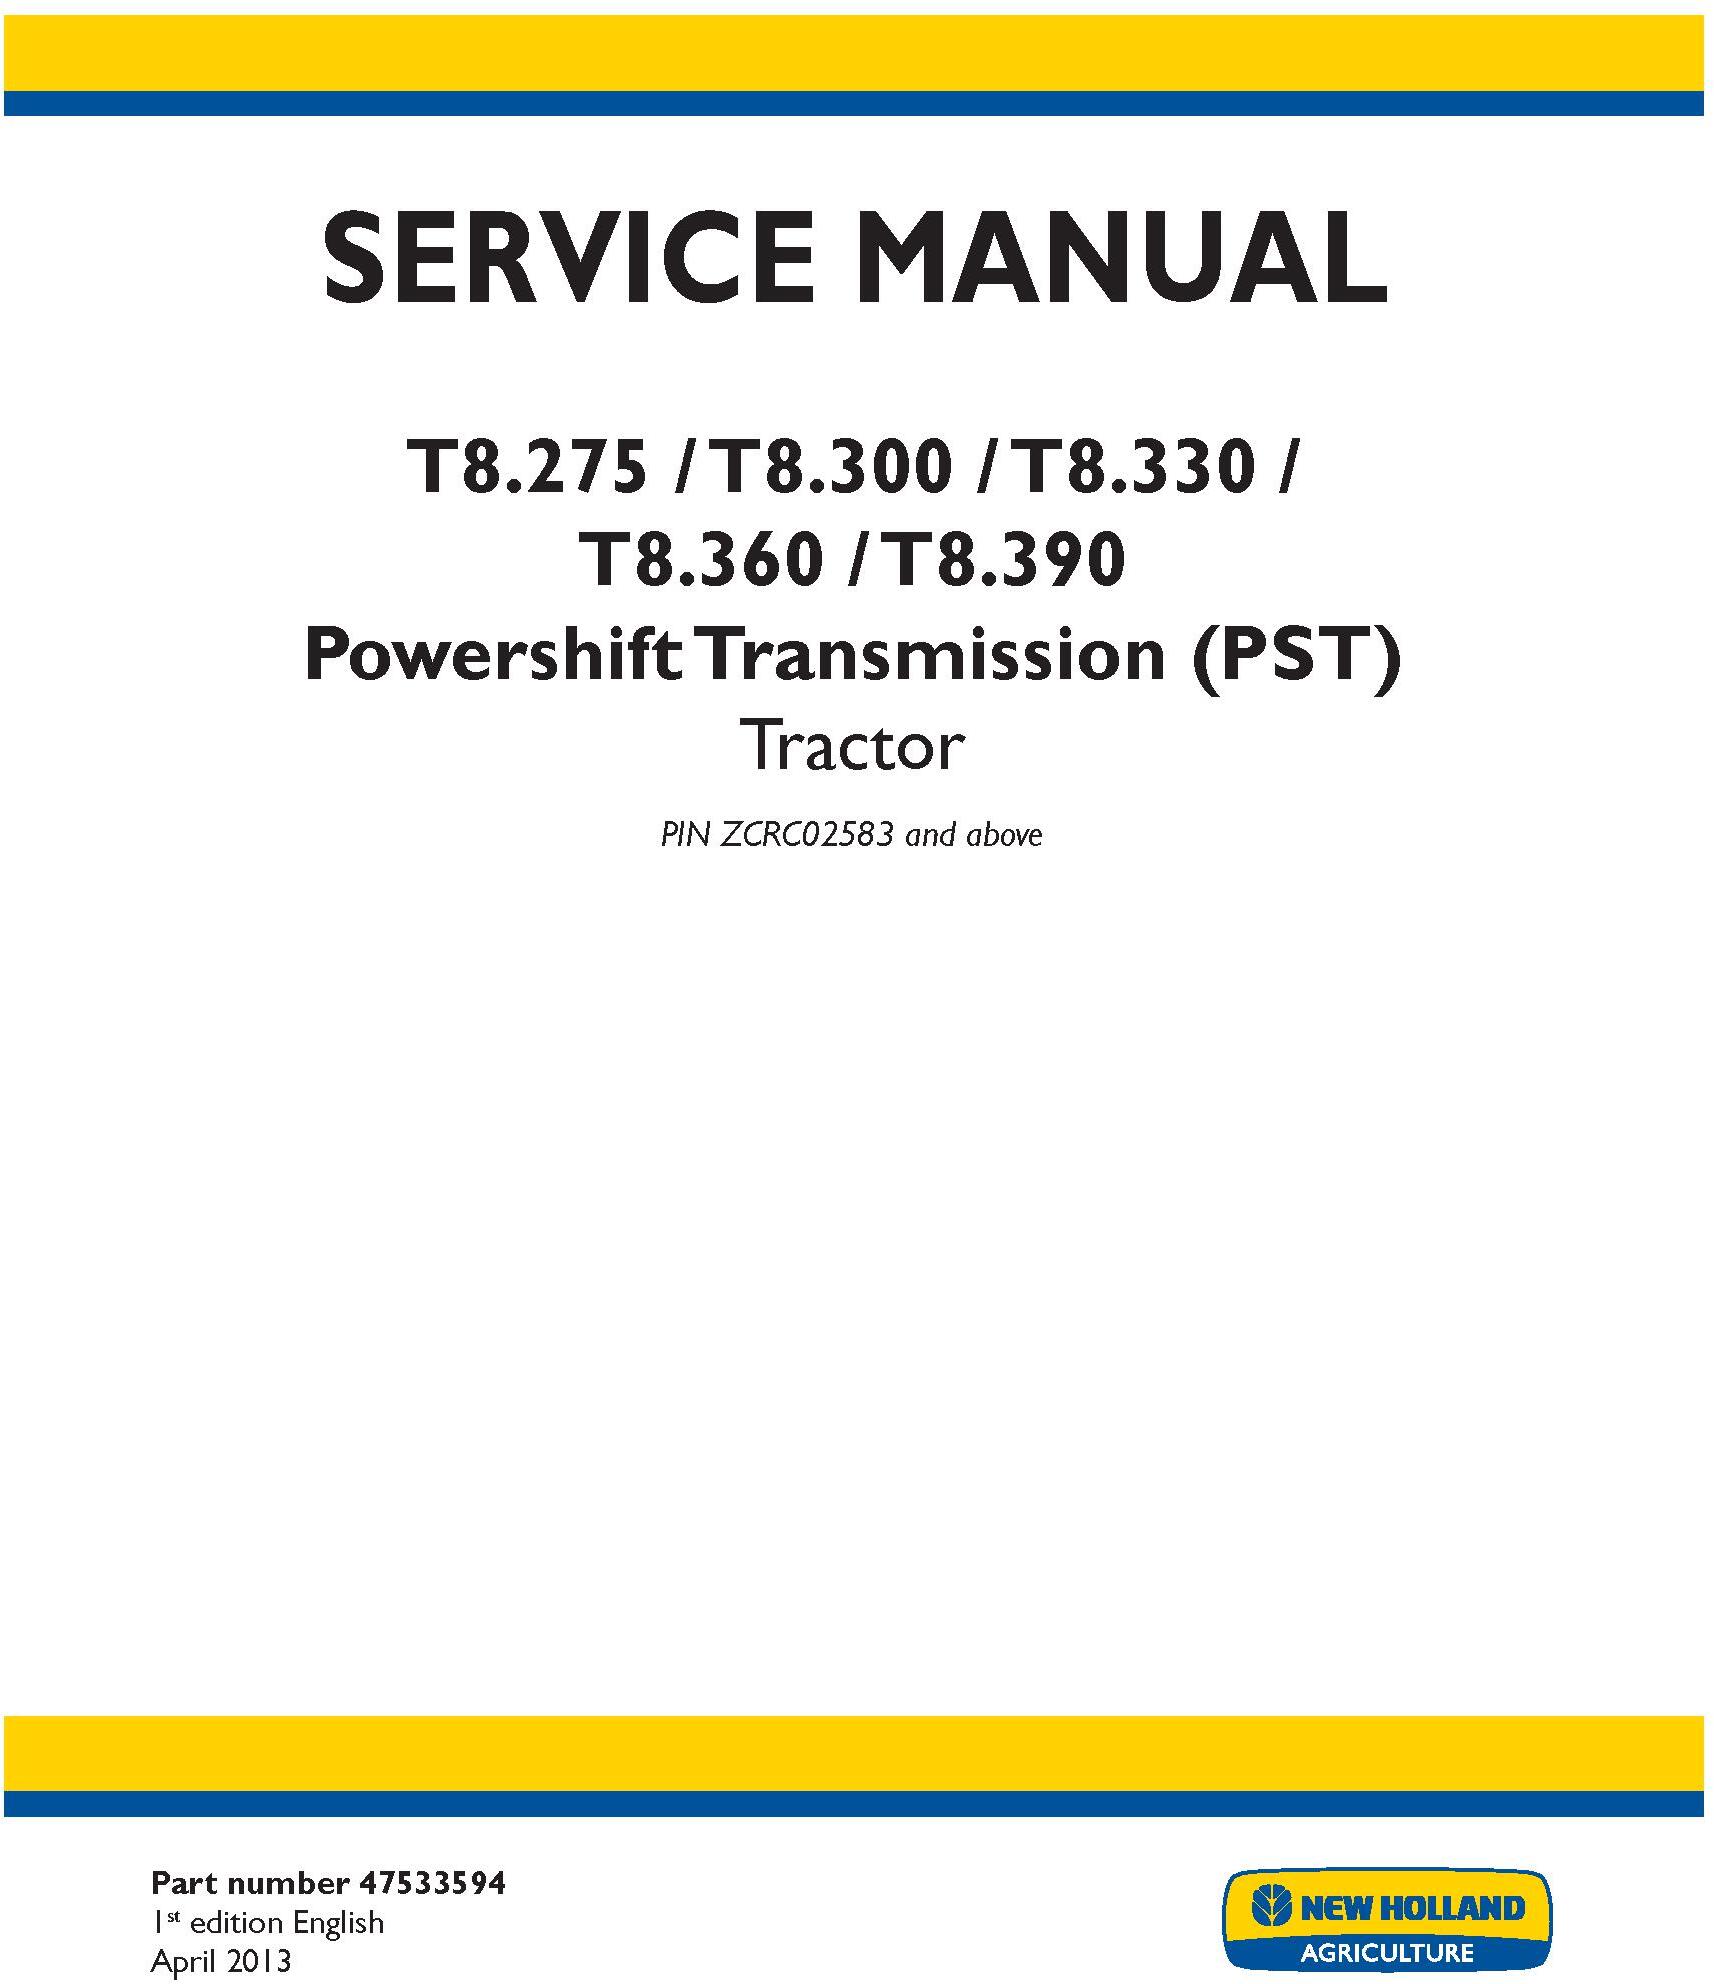 New Holland T8.275, T8.300, T8.330, T8.360, T8.390 Tractor w. Powershift Transmission Service Manual - 19389